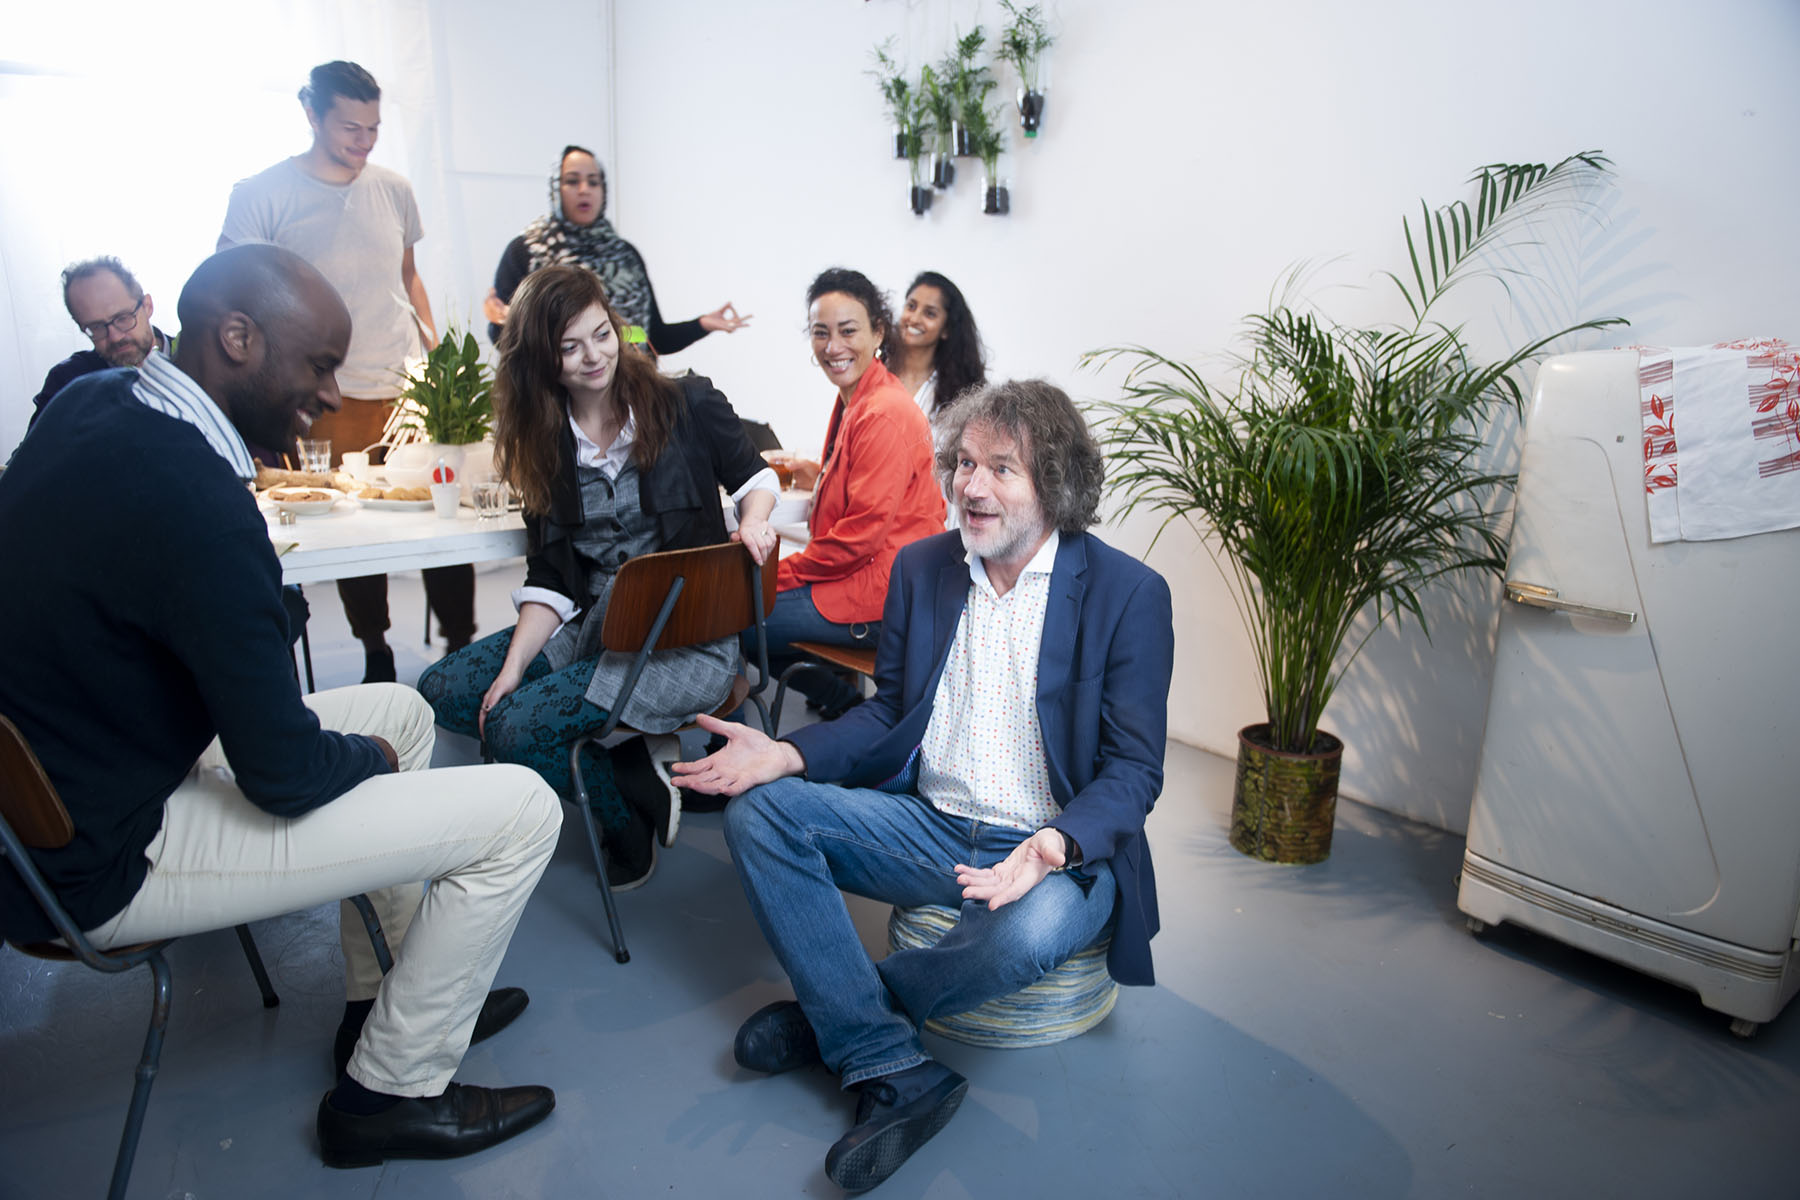 Group of colleagues of different levels sitting and standing around a table having a business meeting.  The CEO is sitting on a stool, being silly, and making the others laugh.